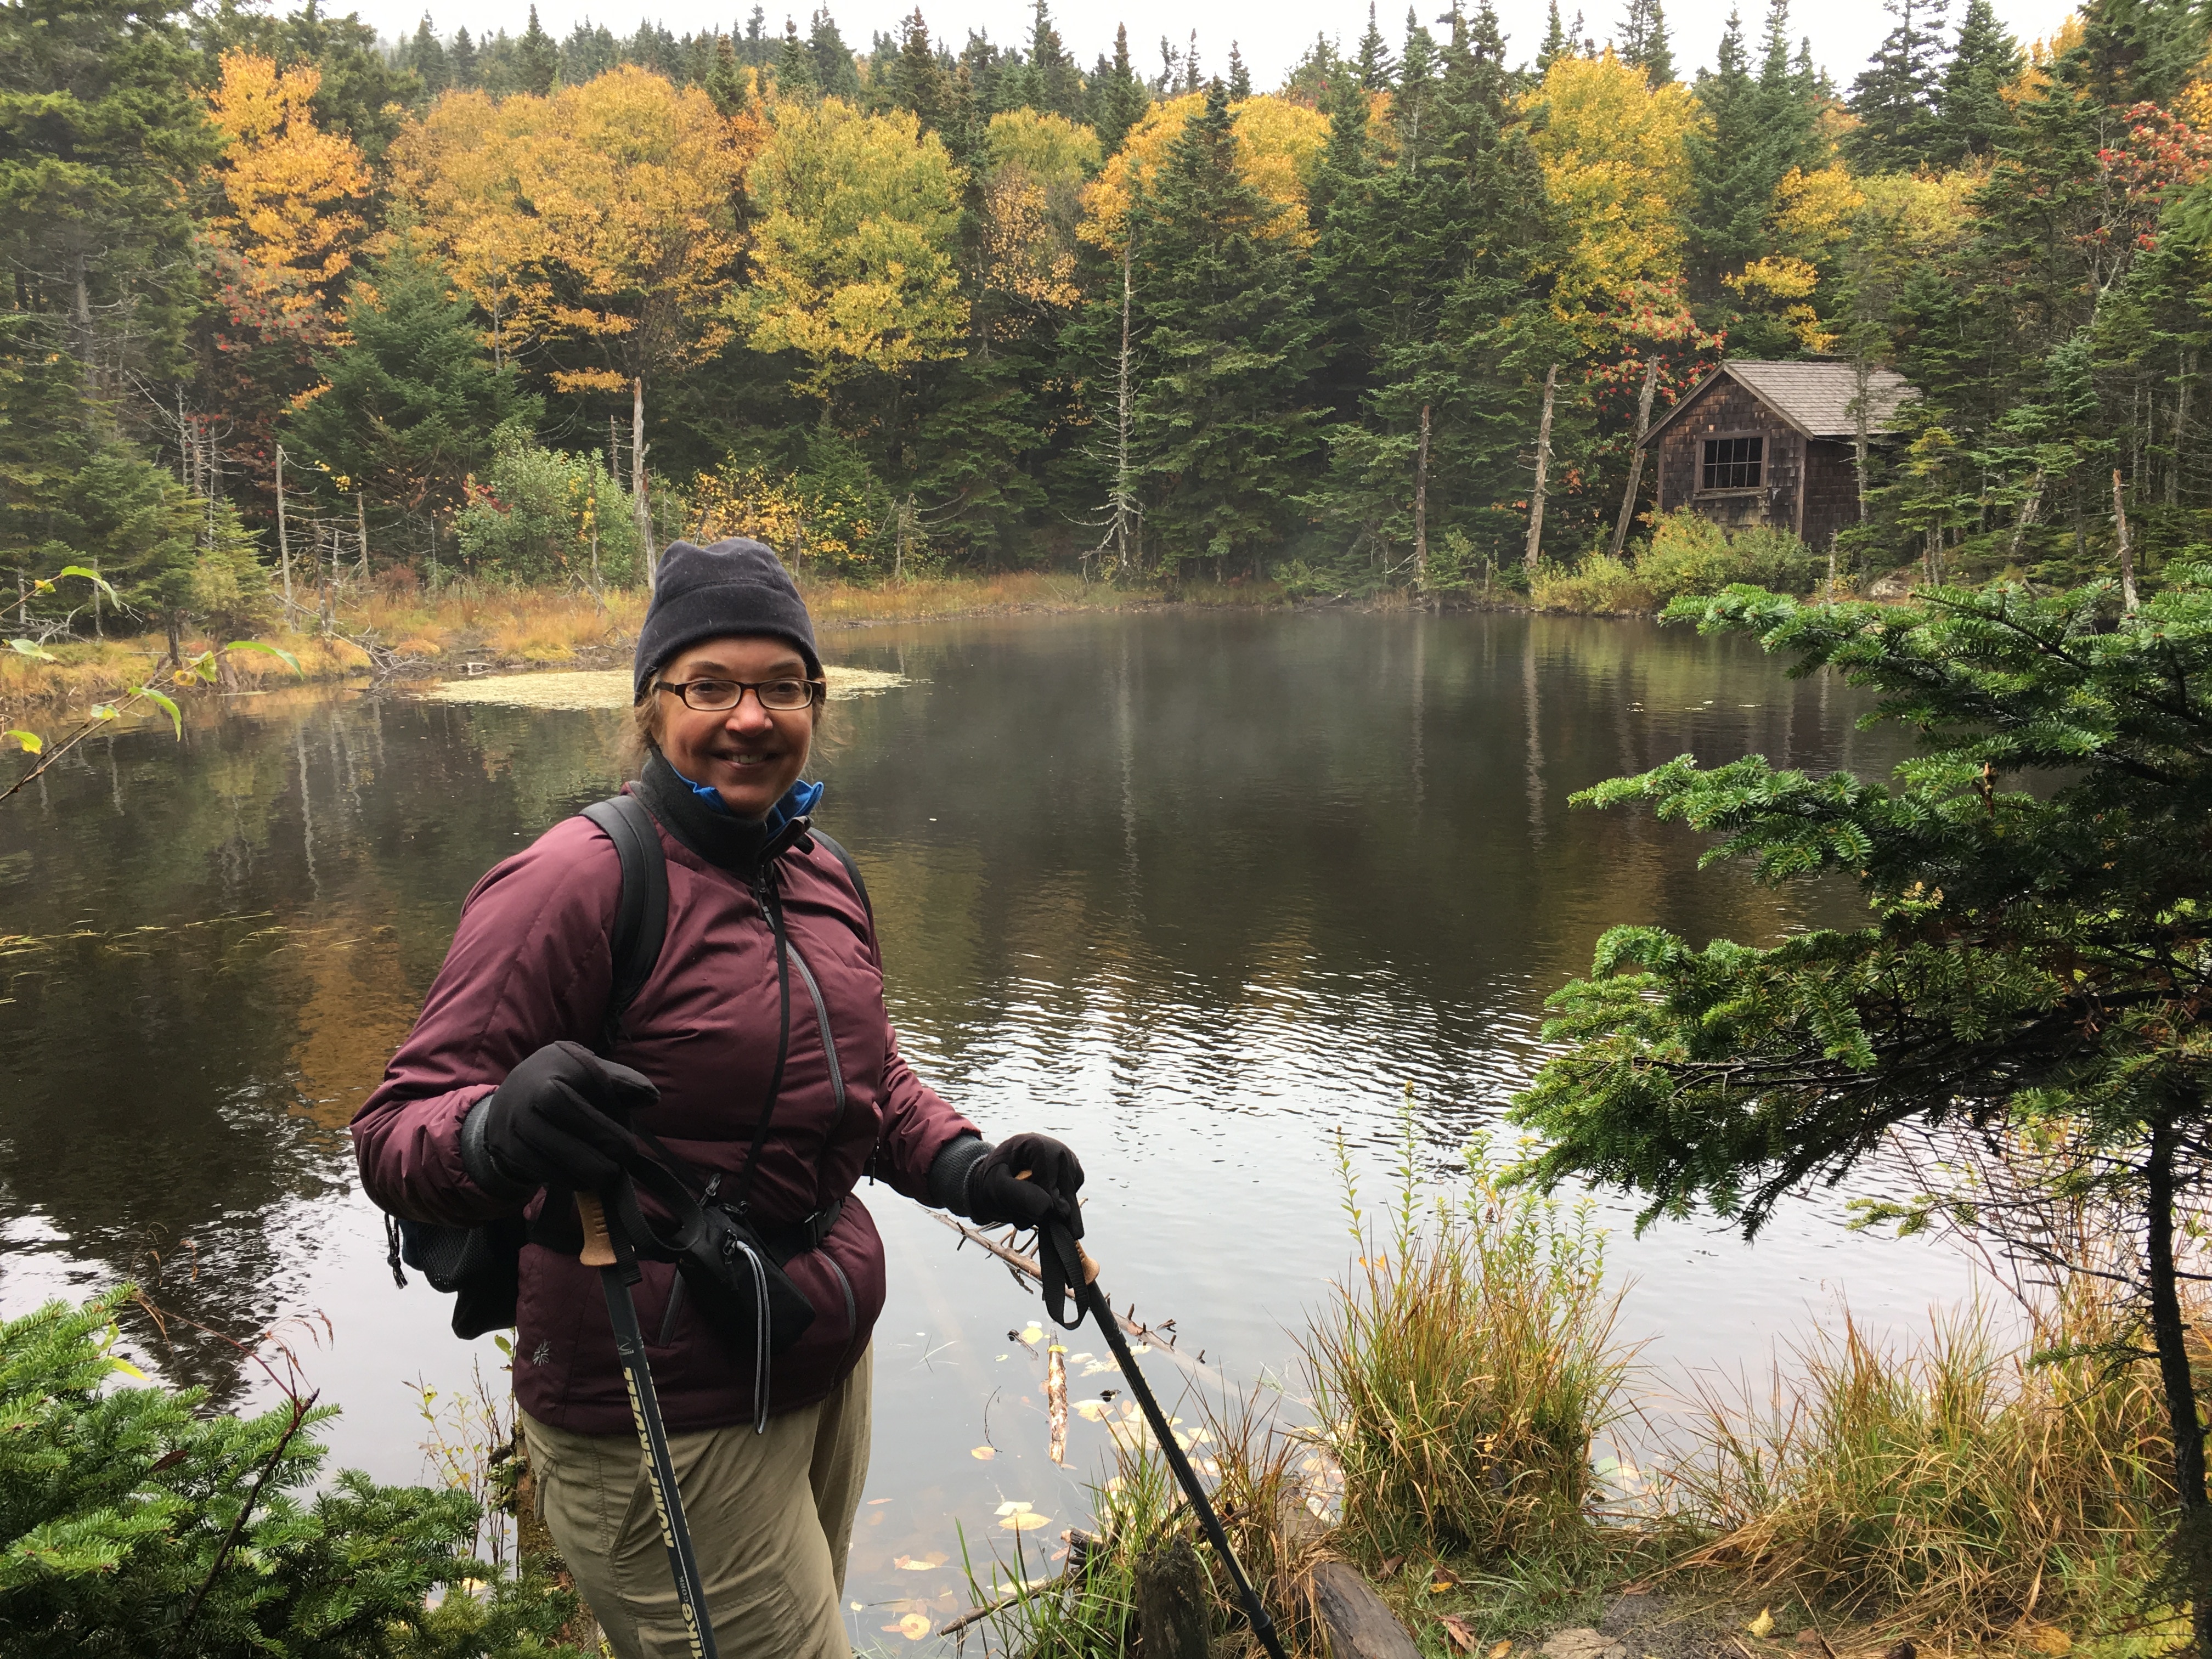 A hiker using two hiking poles stands next to a pond.